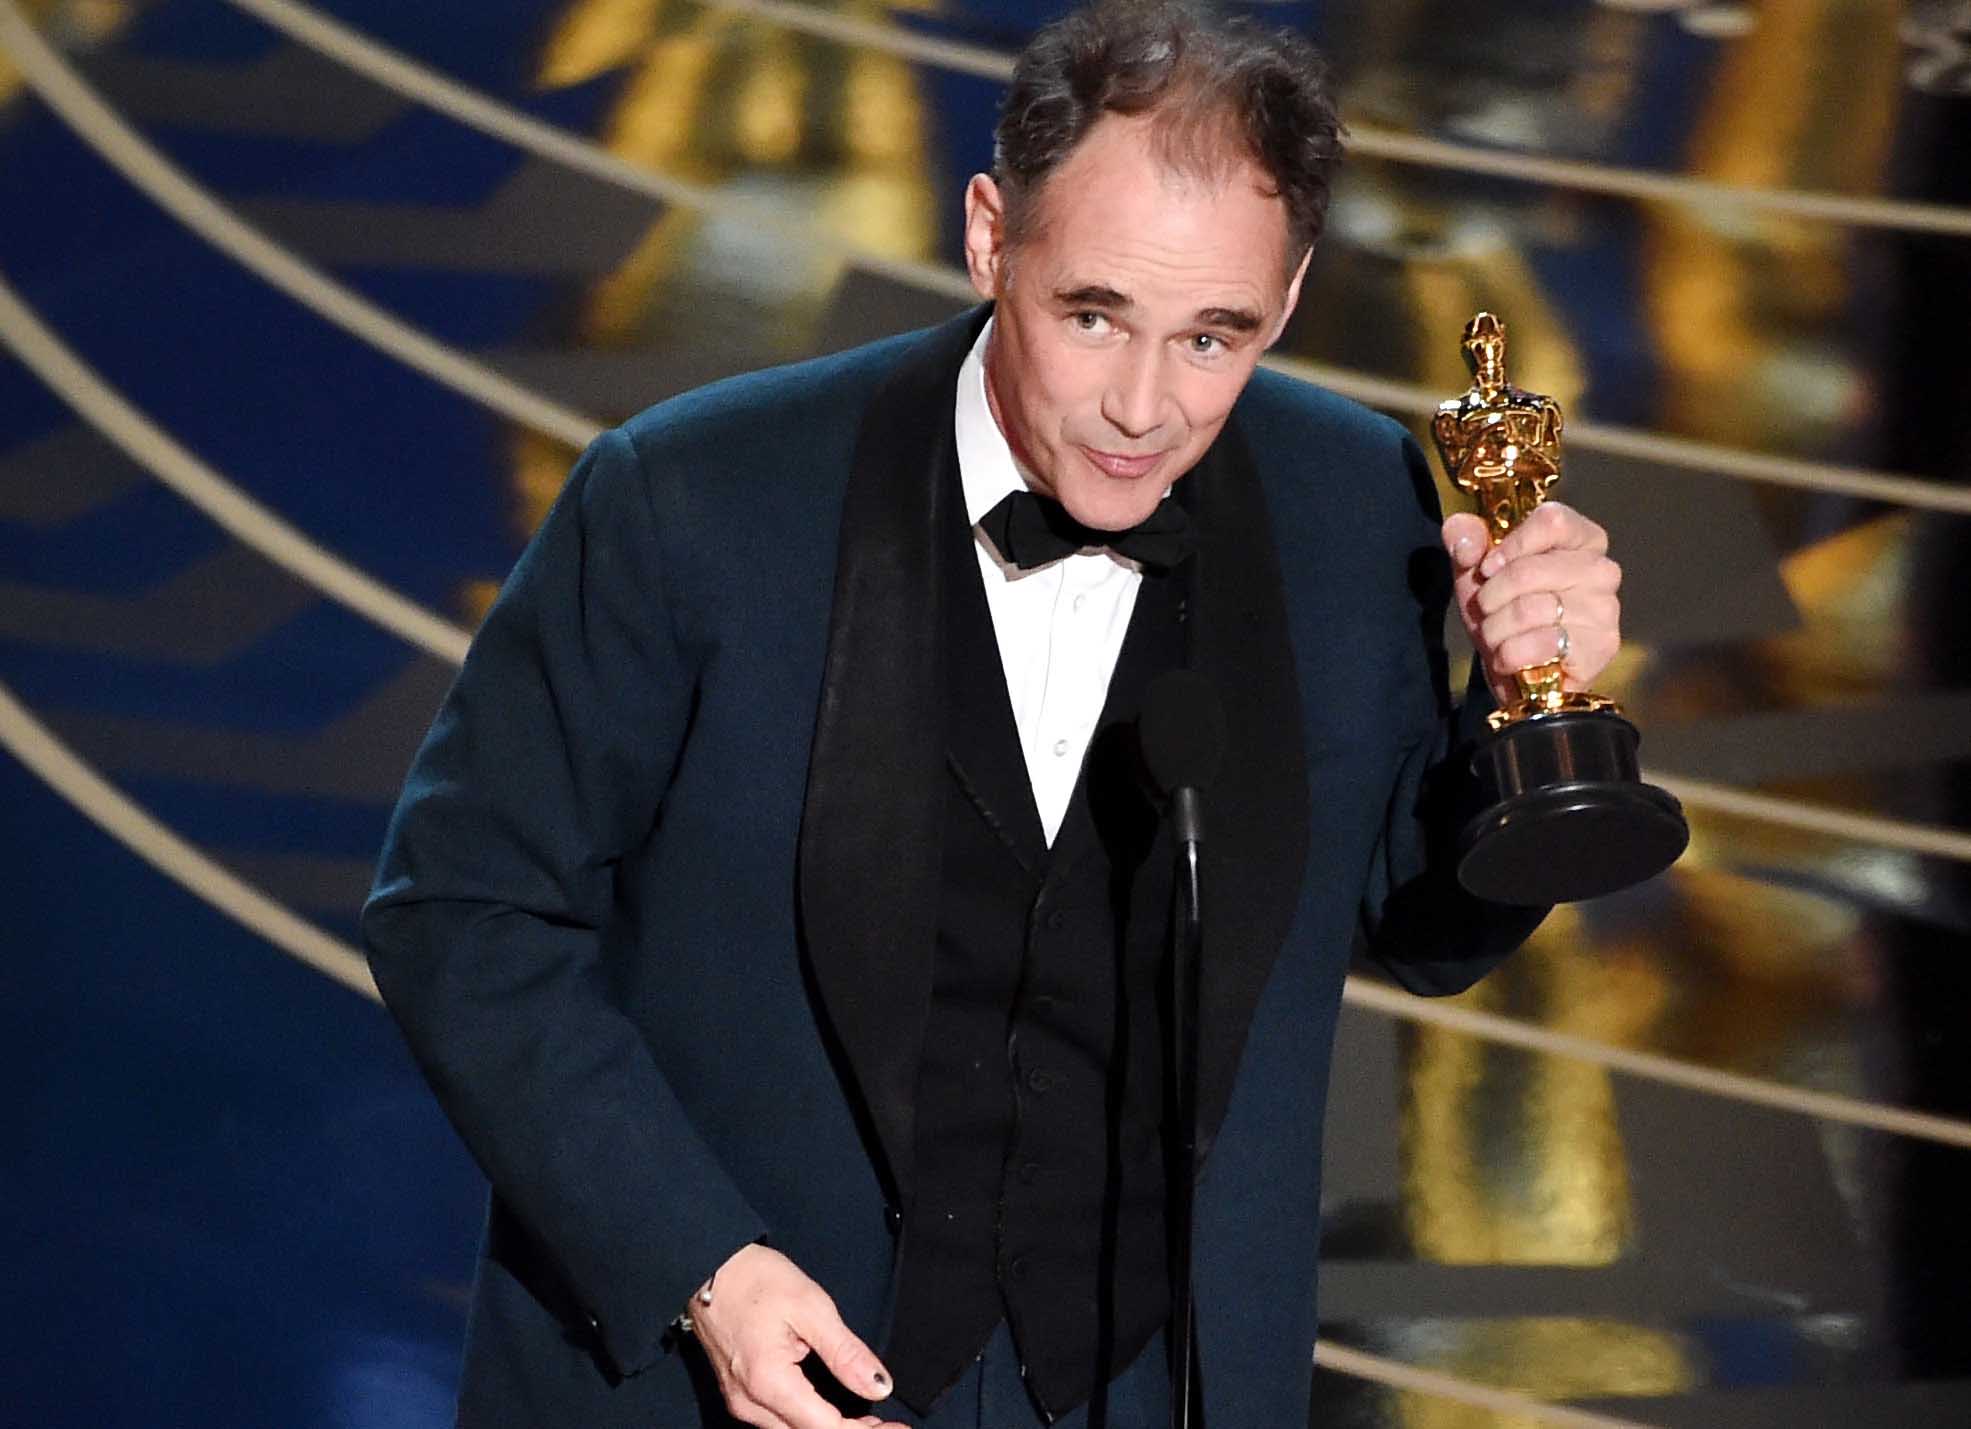 HOLLYWOOD, CA - FEBRUARY 28: Actor Mark Rylance accepts the Best Supporting Actor award for 'Bridge of Spies' onstage during the 88th Annual Academy Awards at the Dolby Theatre on February 28, 2016 in Hollywood, California. (Photo by Kevin Winter/Getty Images)